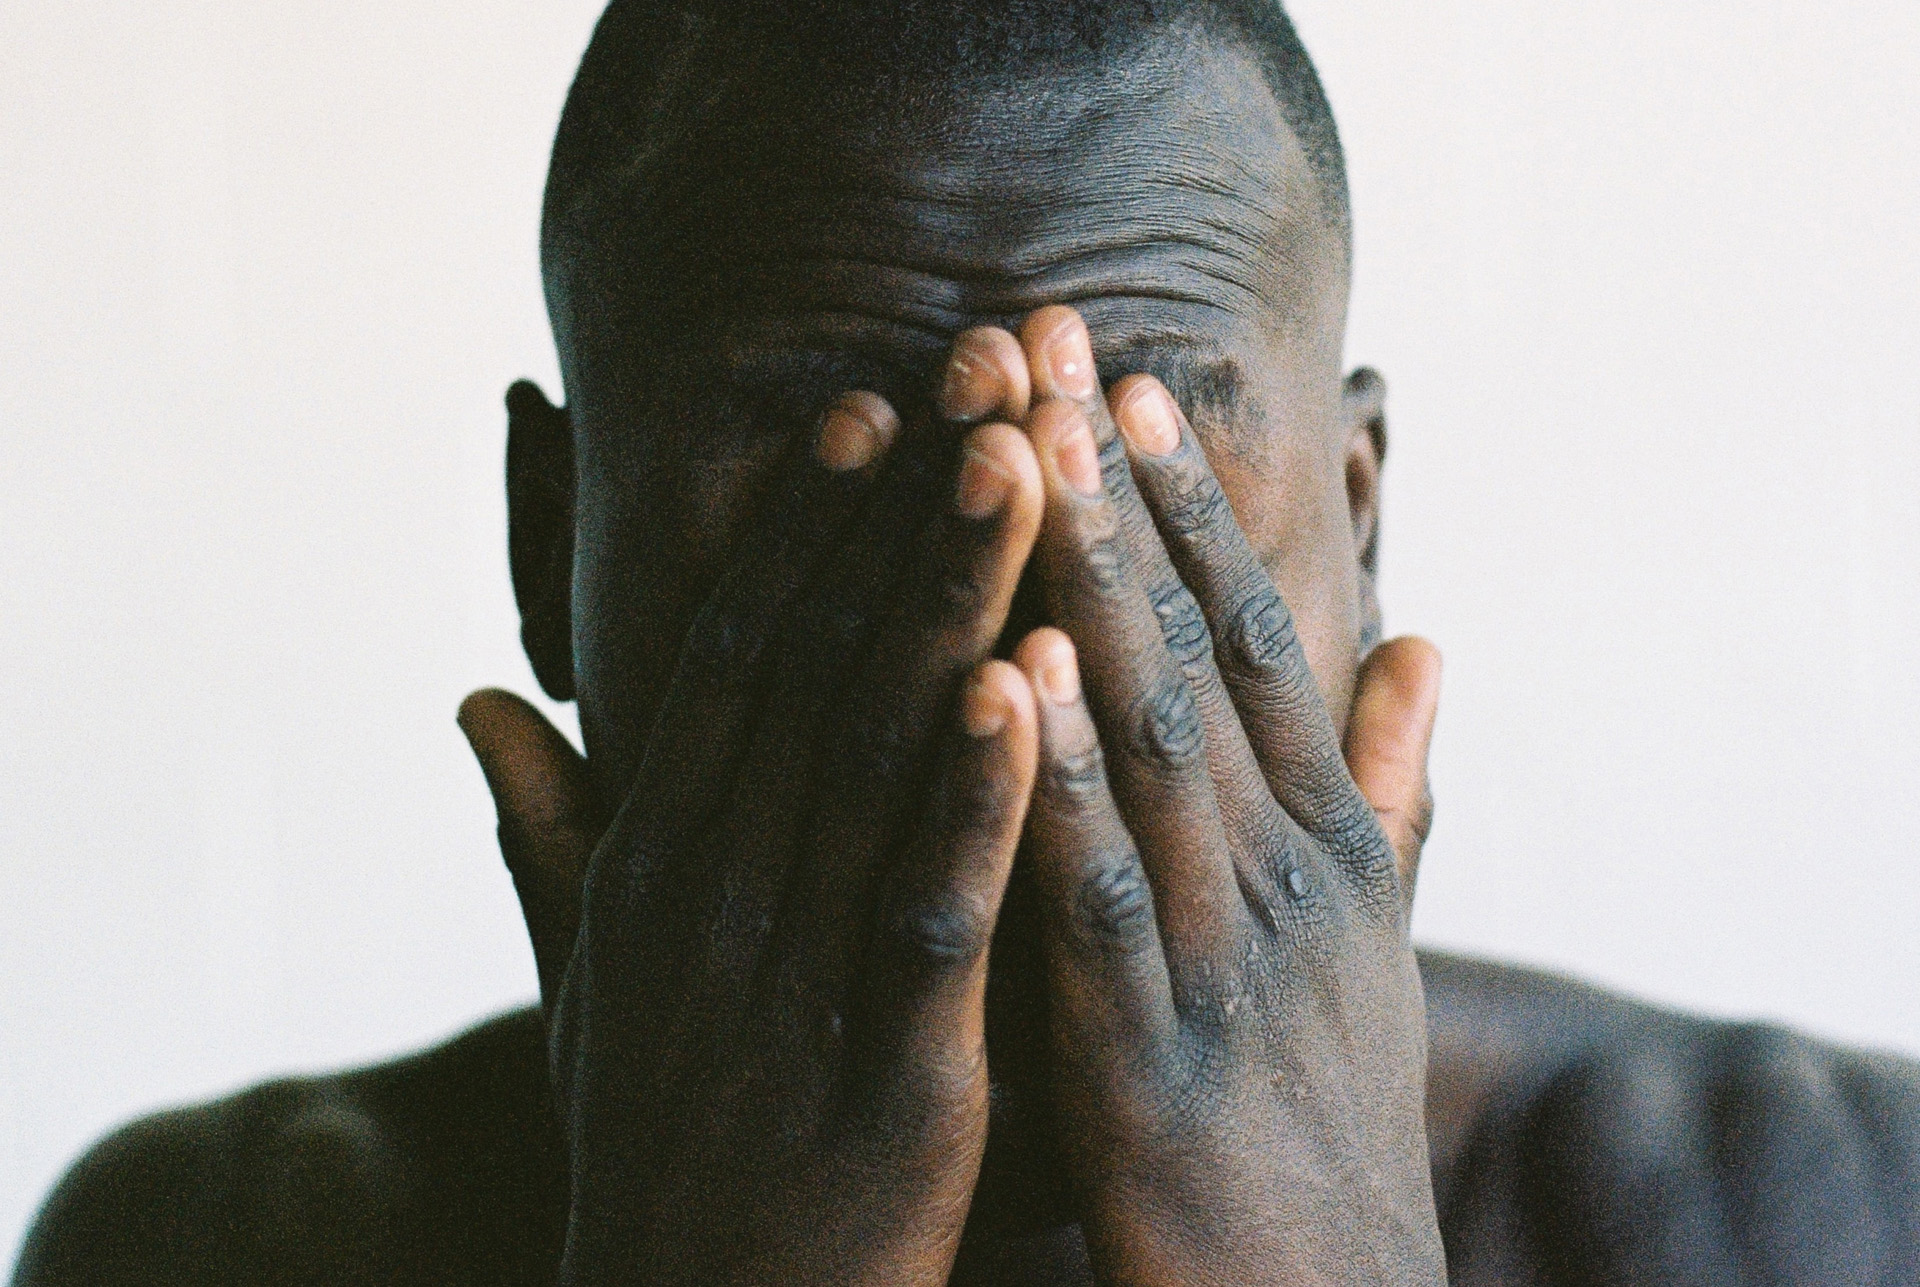 A shirtless man covering his face with his hands.